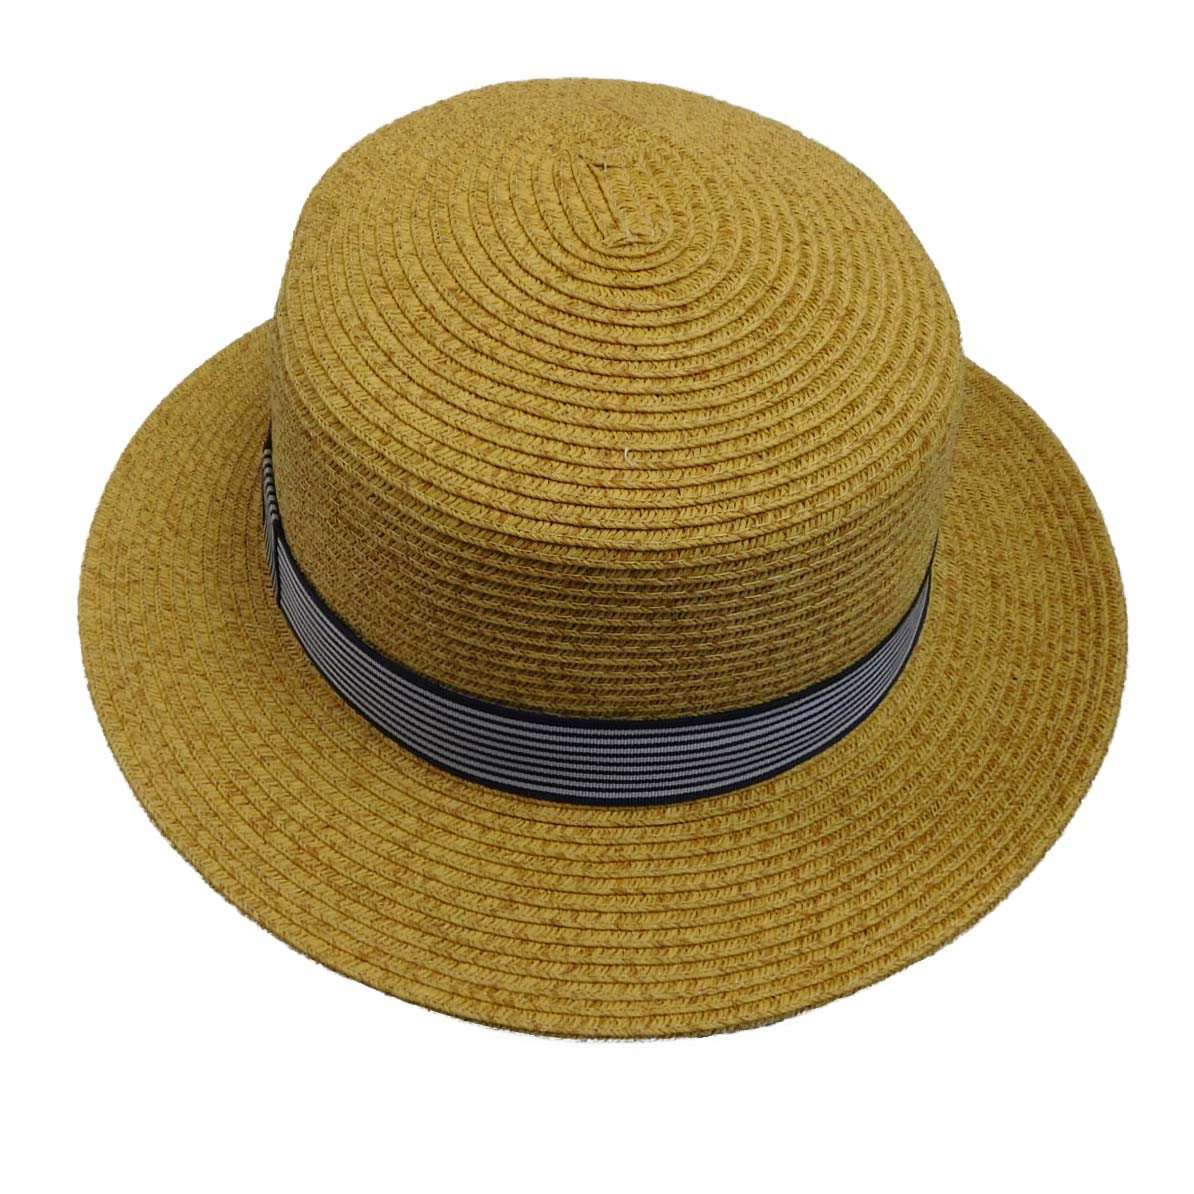 Straw Boater Hat with Striped Band, Gambler Hat - SetarTrading Hats 